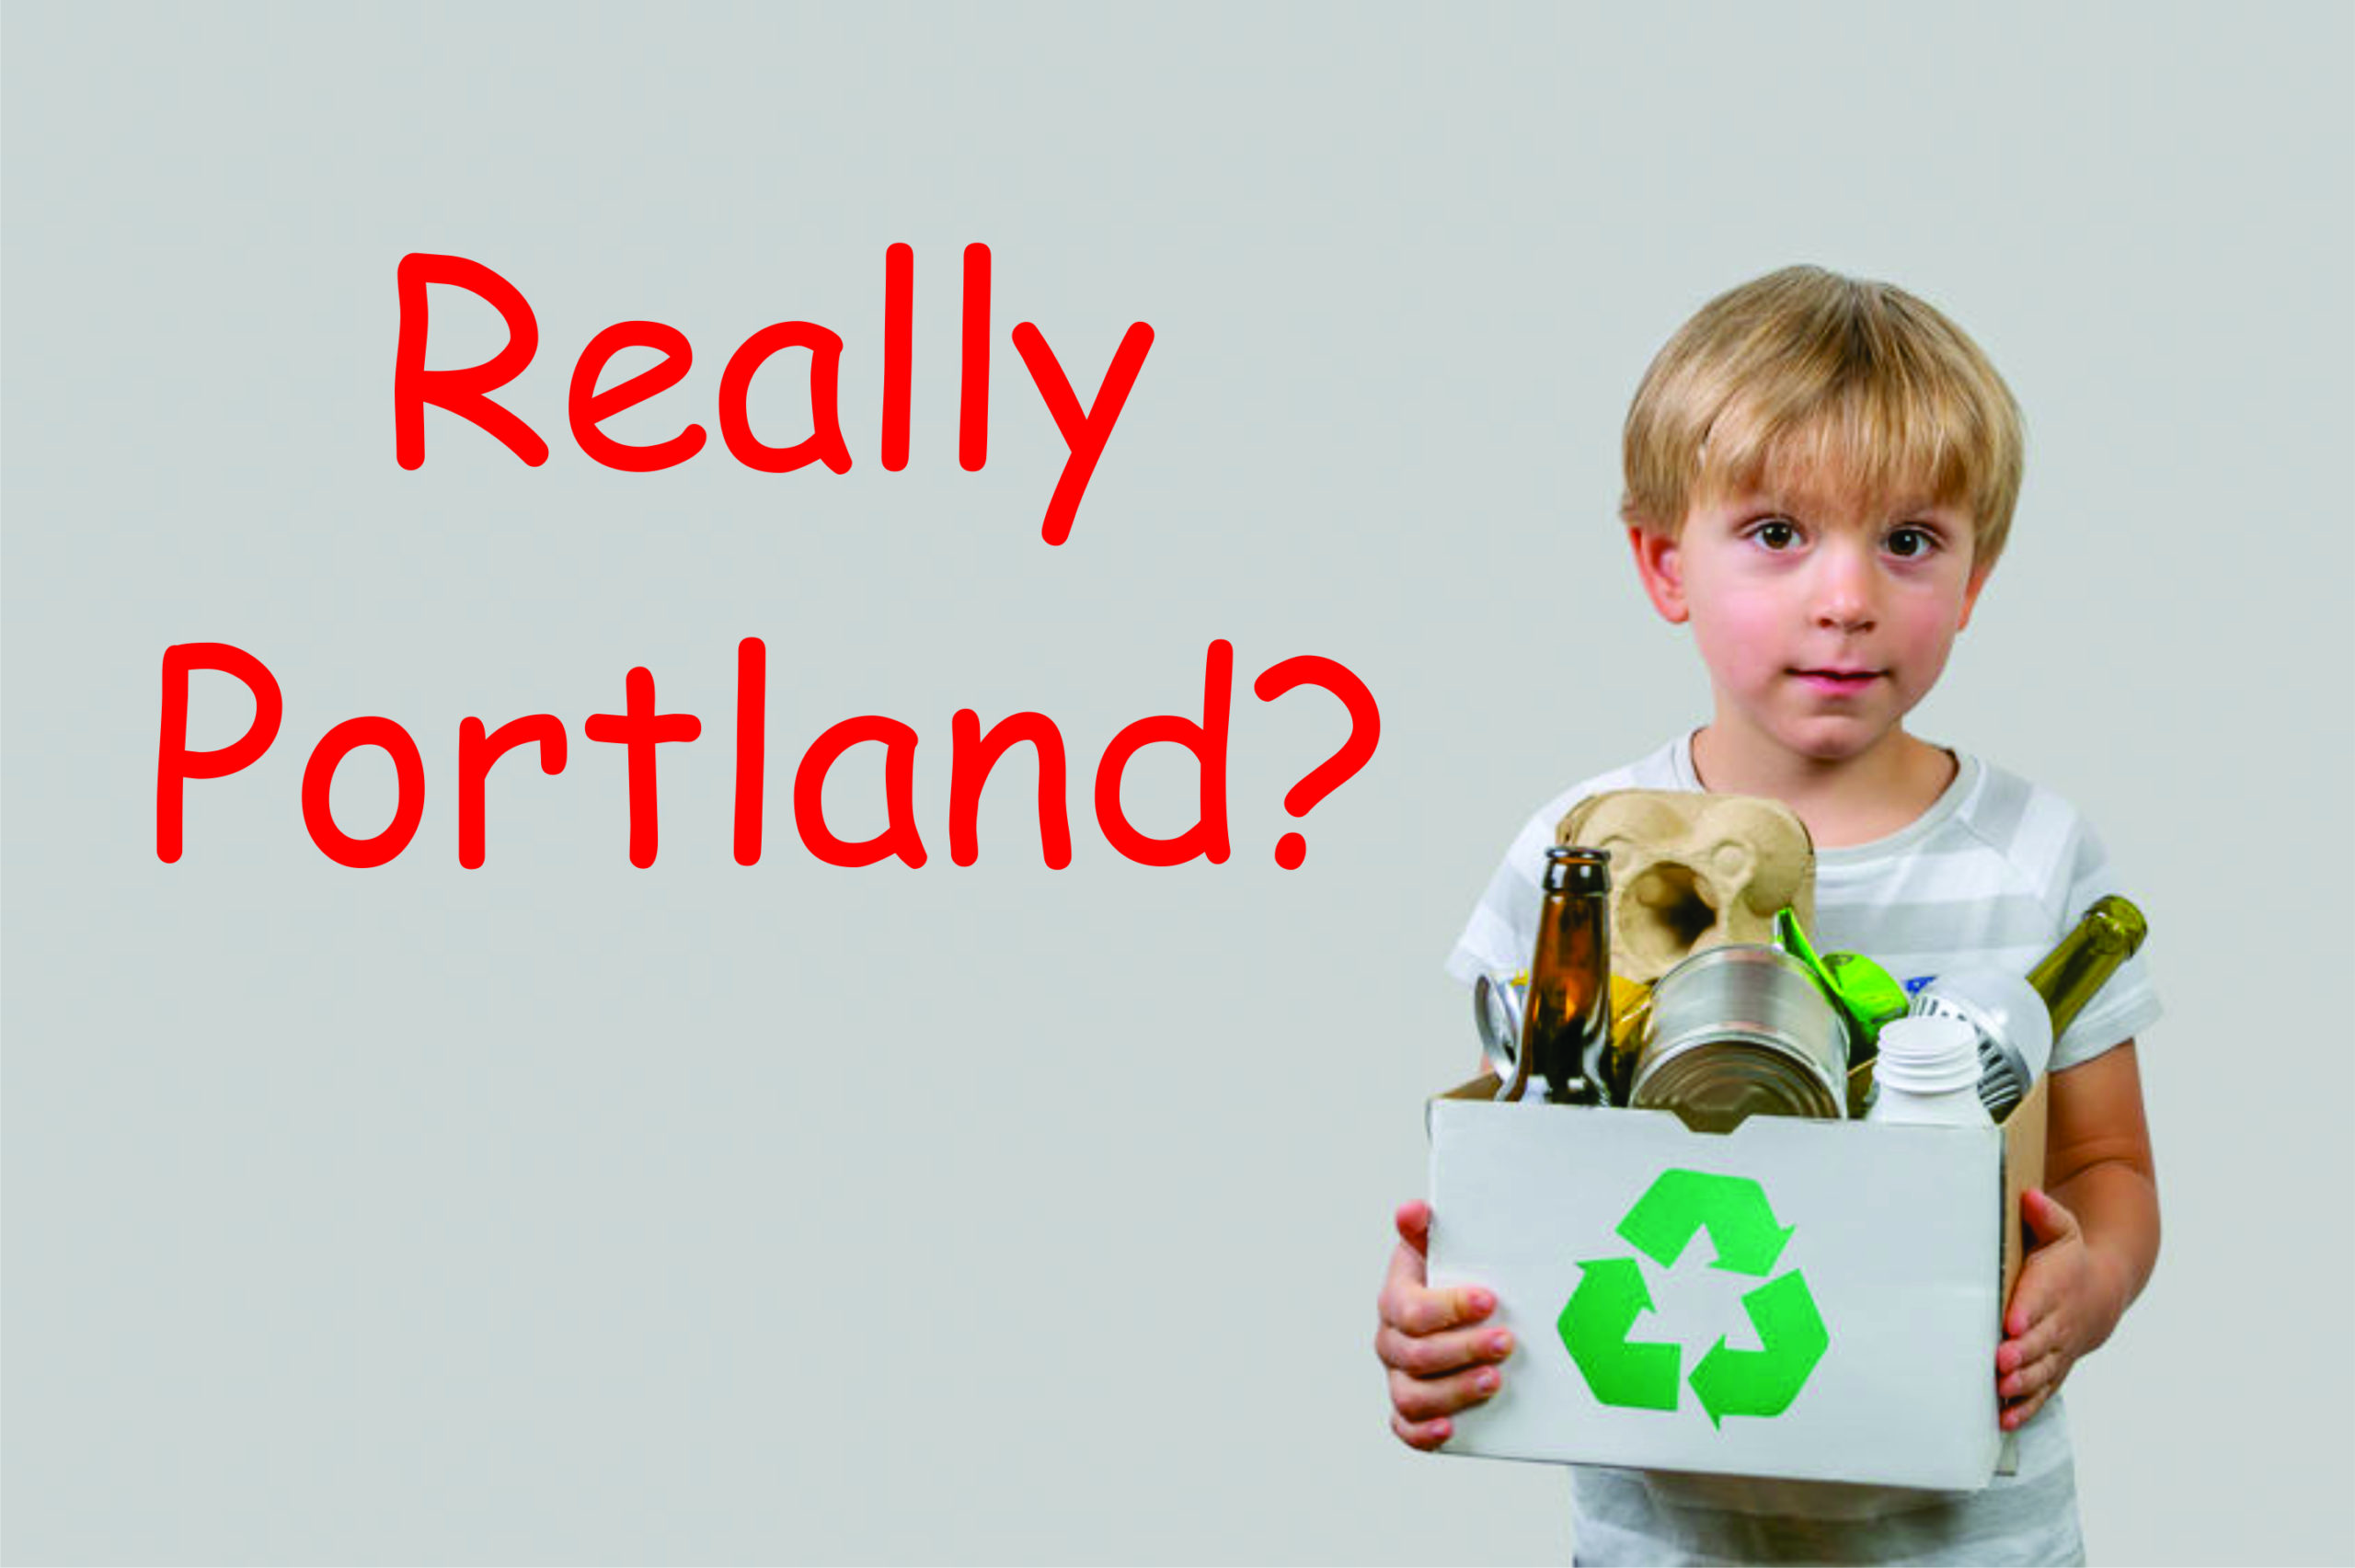 Portland Greens taxes could kill recycling plant